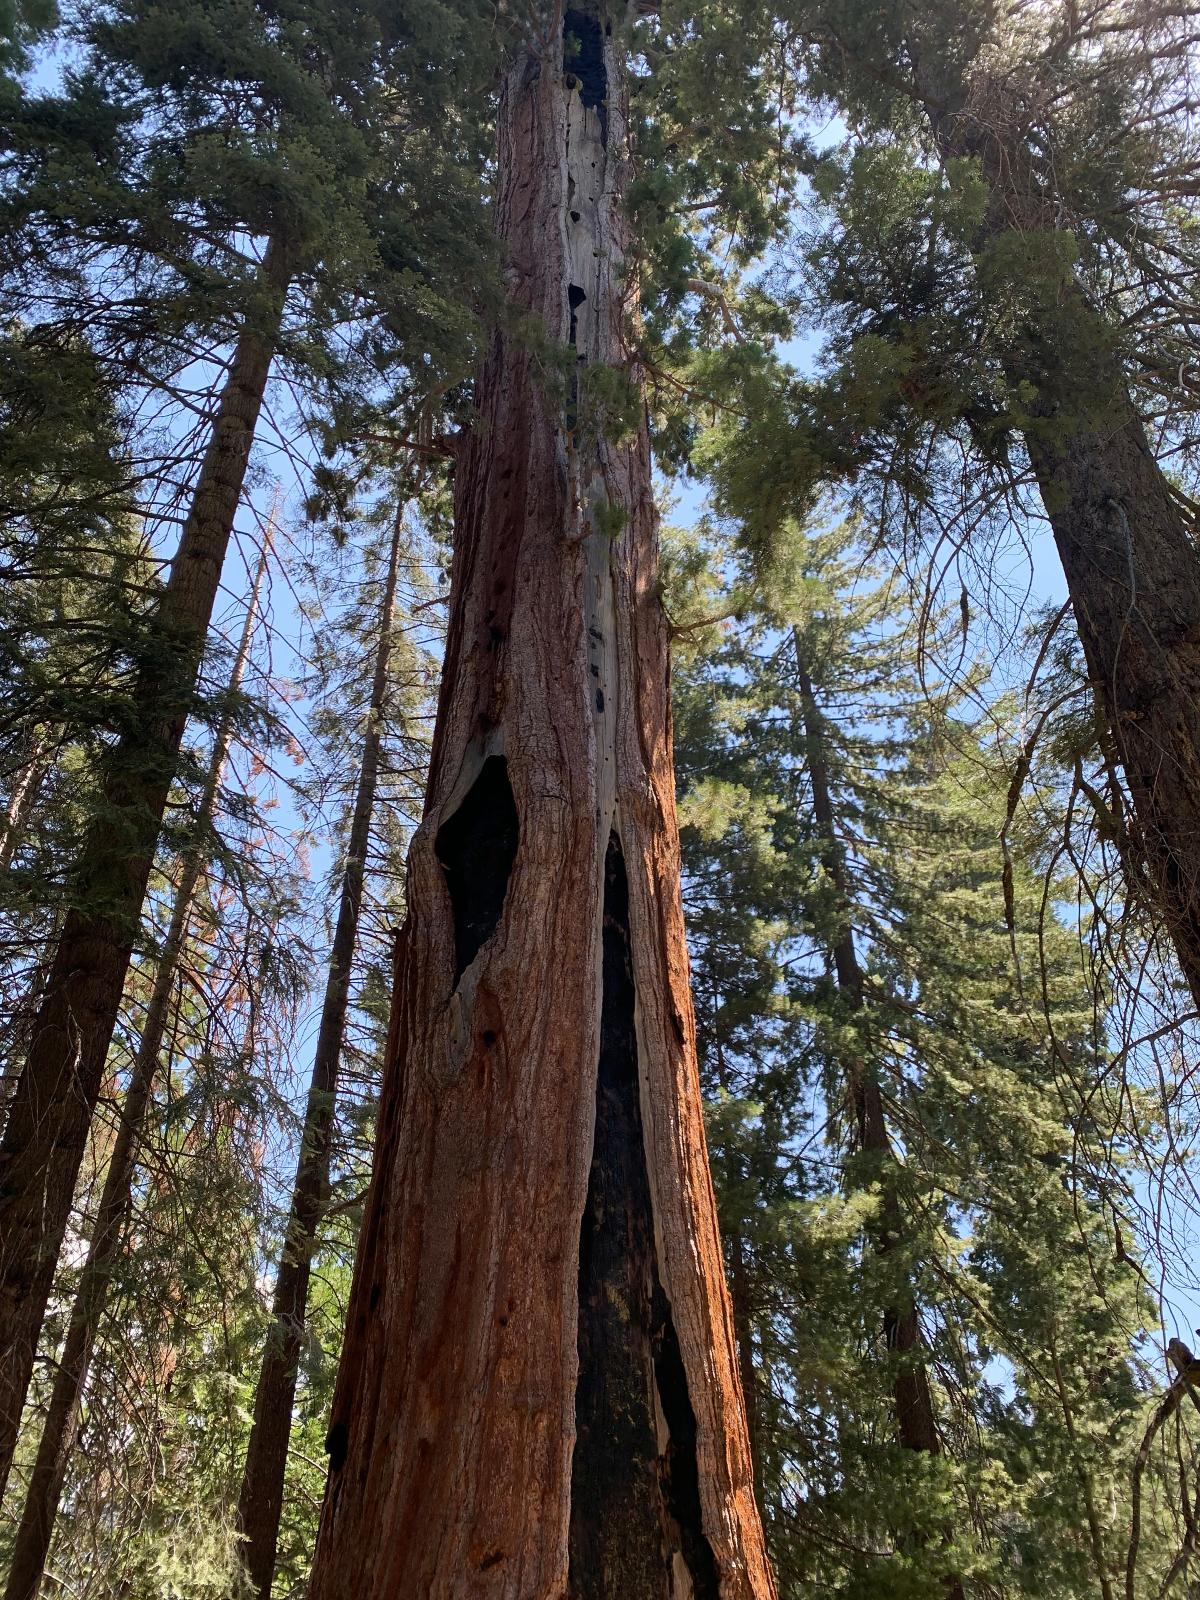 Giant Sequoia Lands Coalition Spends 10m To Restore Giant Sequoia Groves From Wildfires 